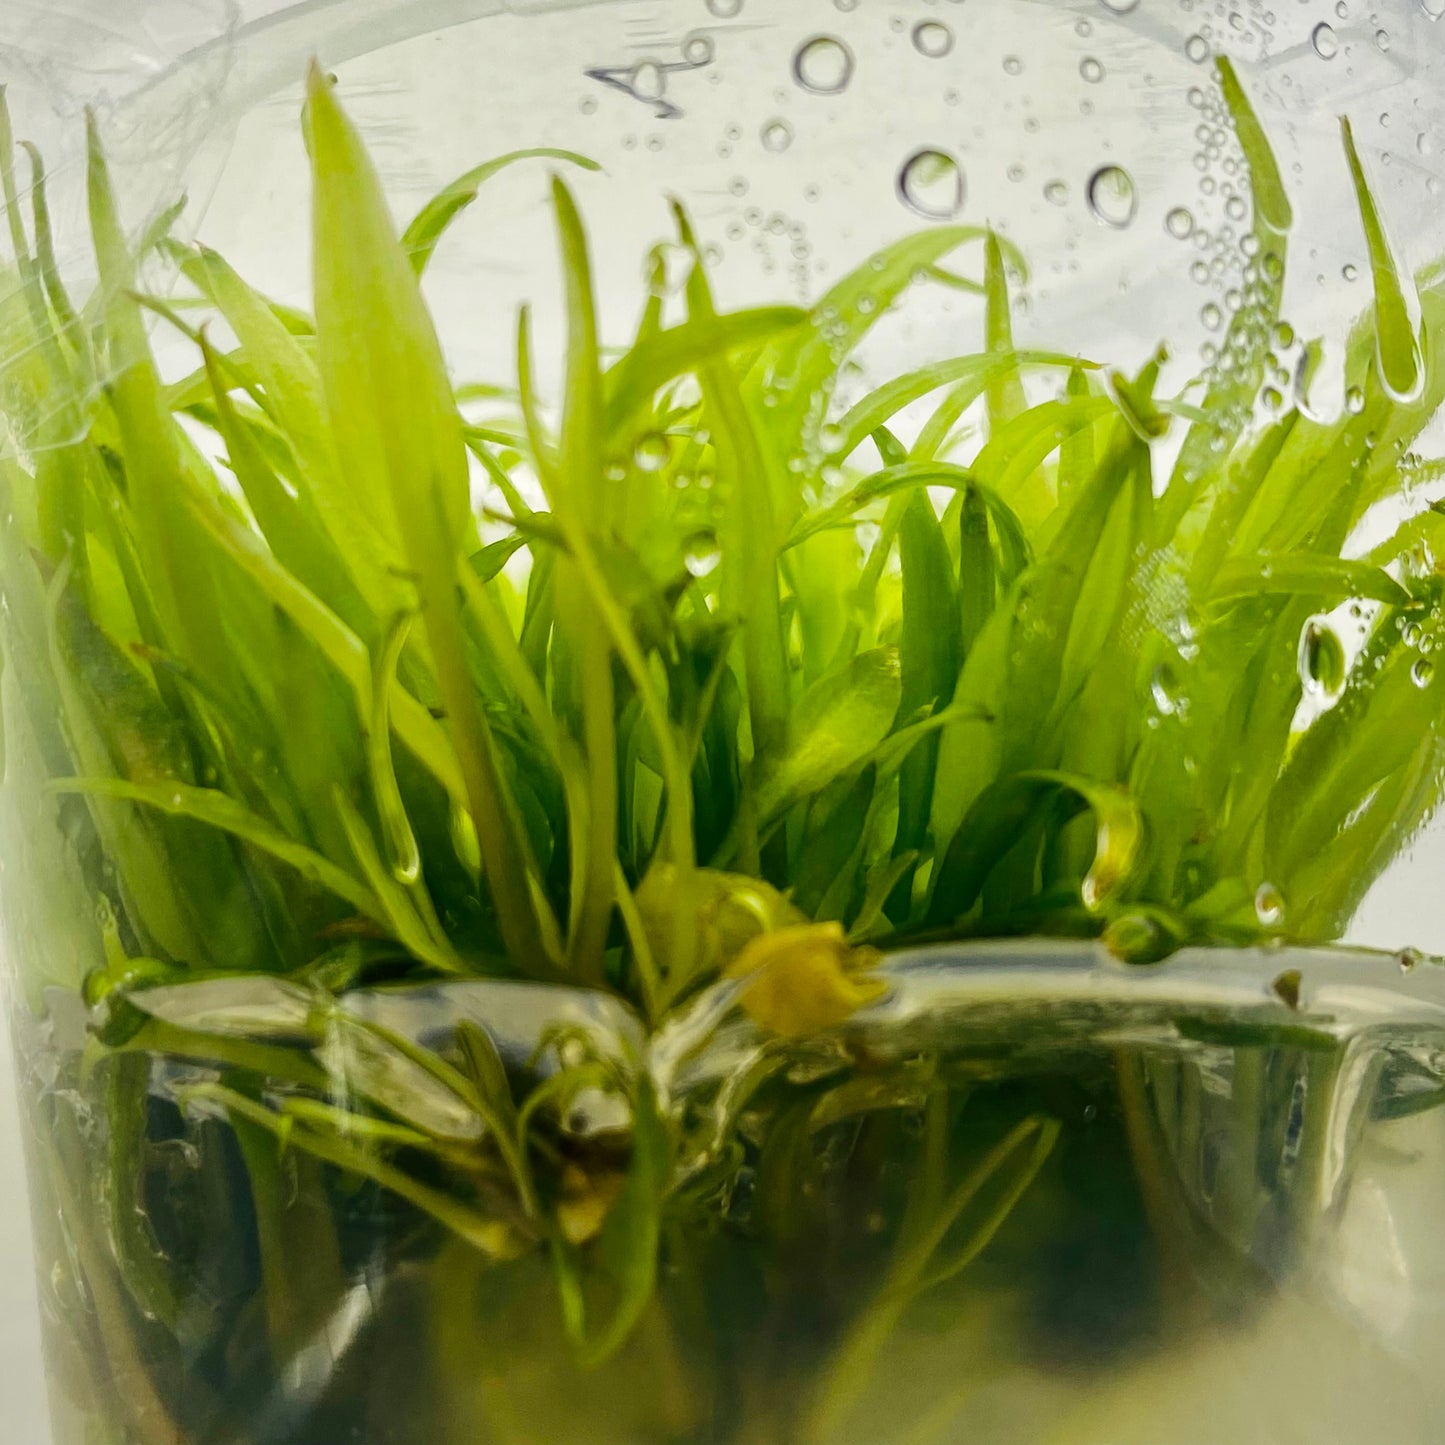 Cryptocoryne Wendtii Green Tissue Culture